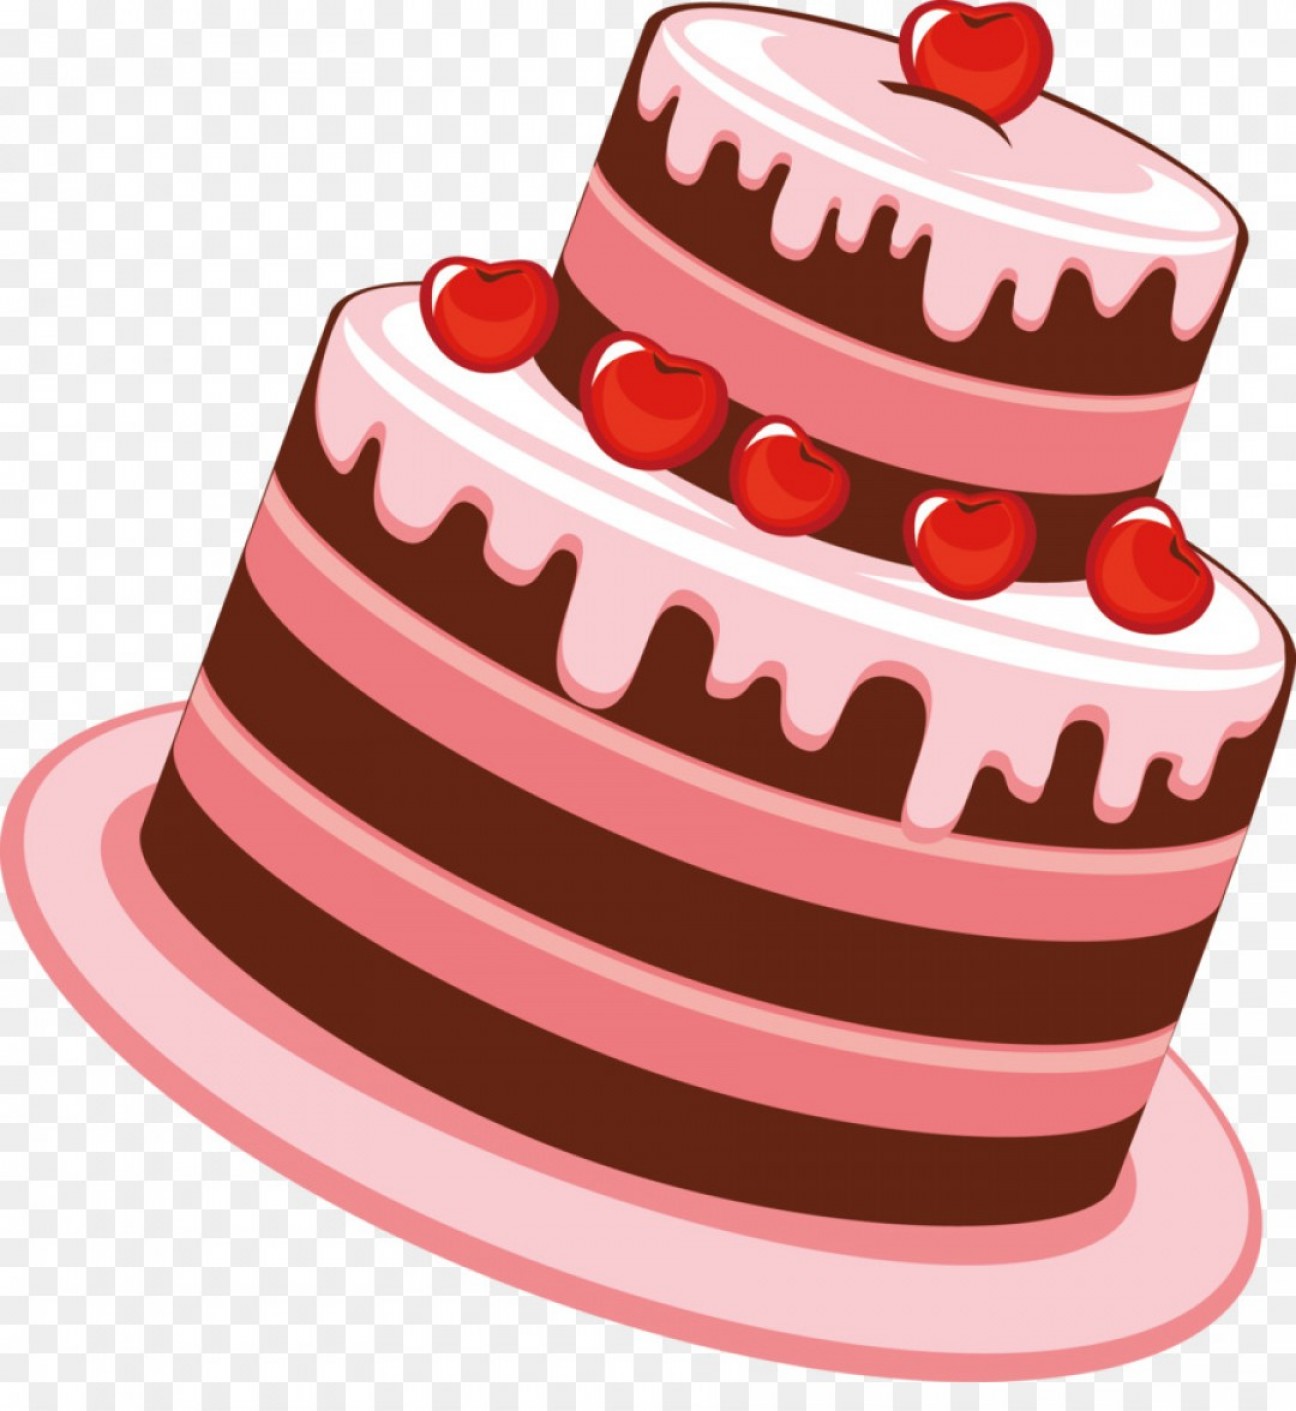 Cake Vector Png at Vectorified.com | Collection of Cake Vector Png free ...